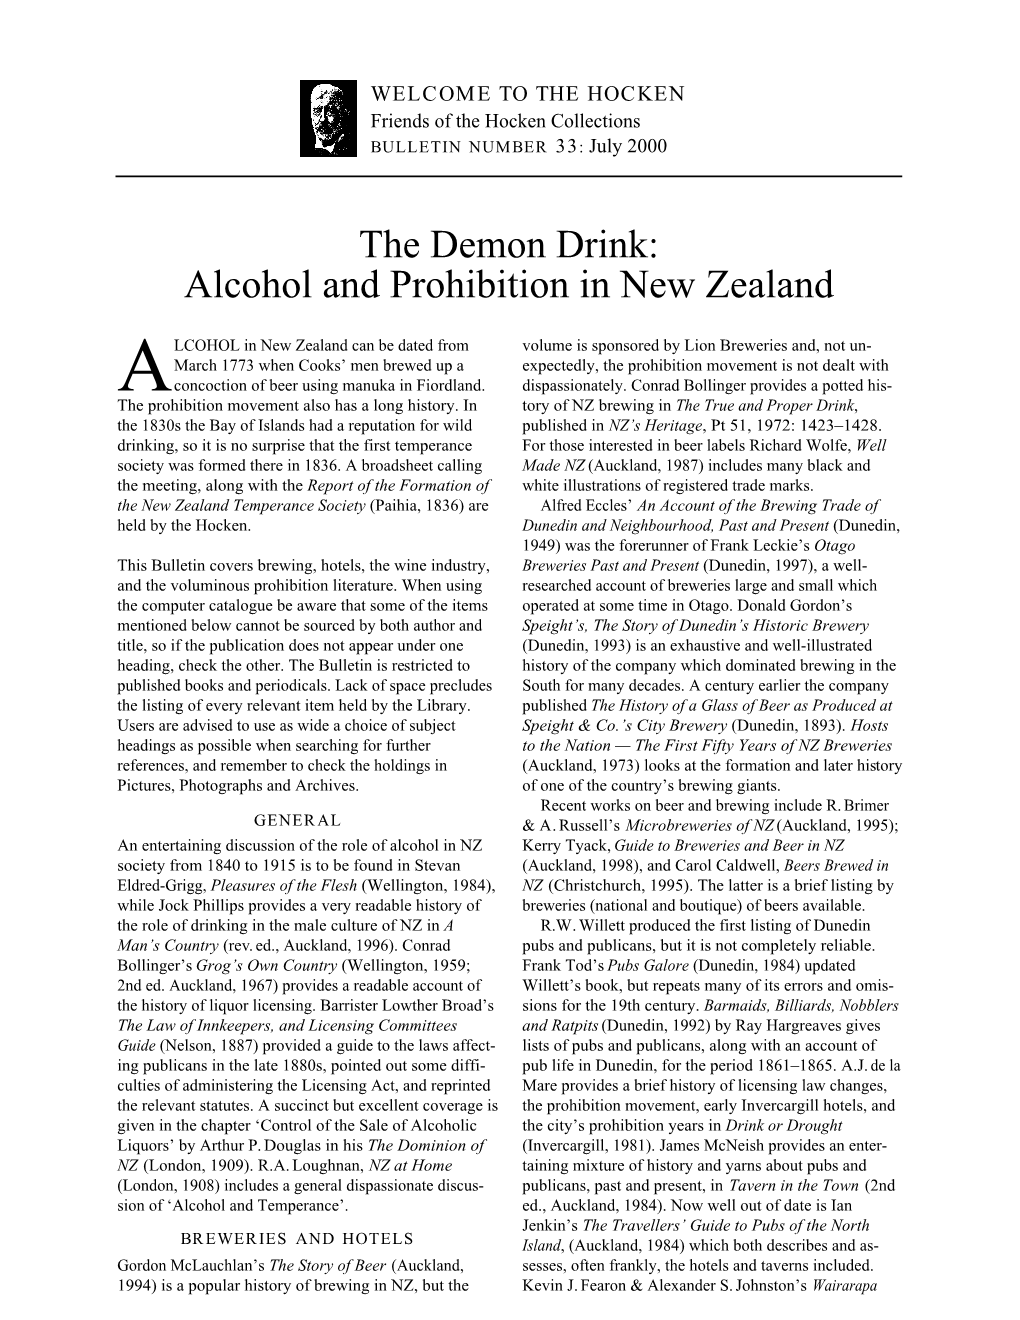 The Demon Drink: Alcohol and Prohibition in New Zealand